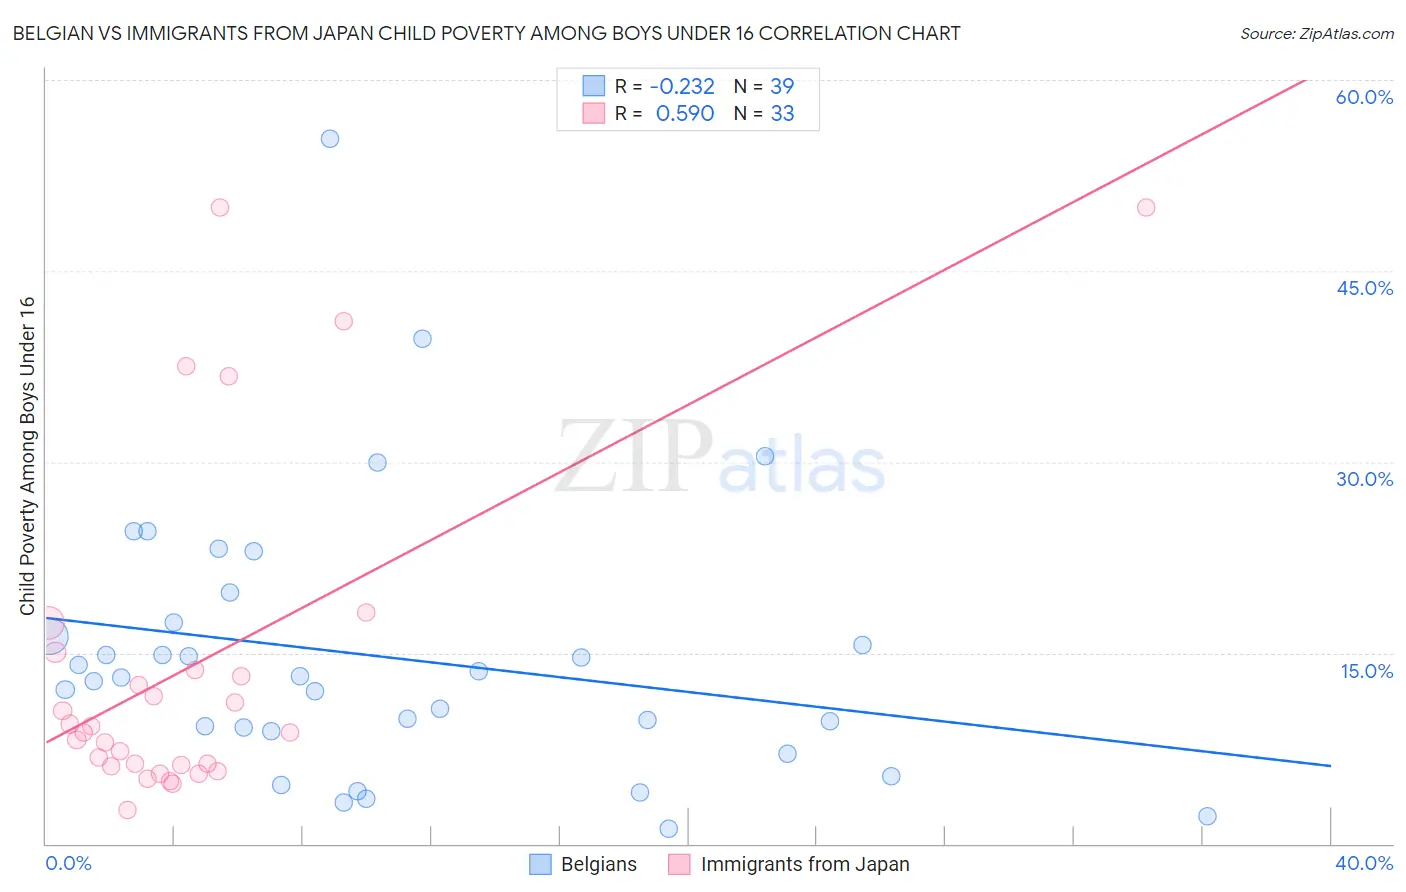 Belgian vs Immigrants from Japan Child Poverty Among Boys Under 16